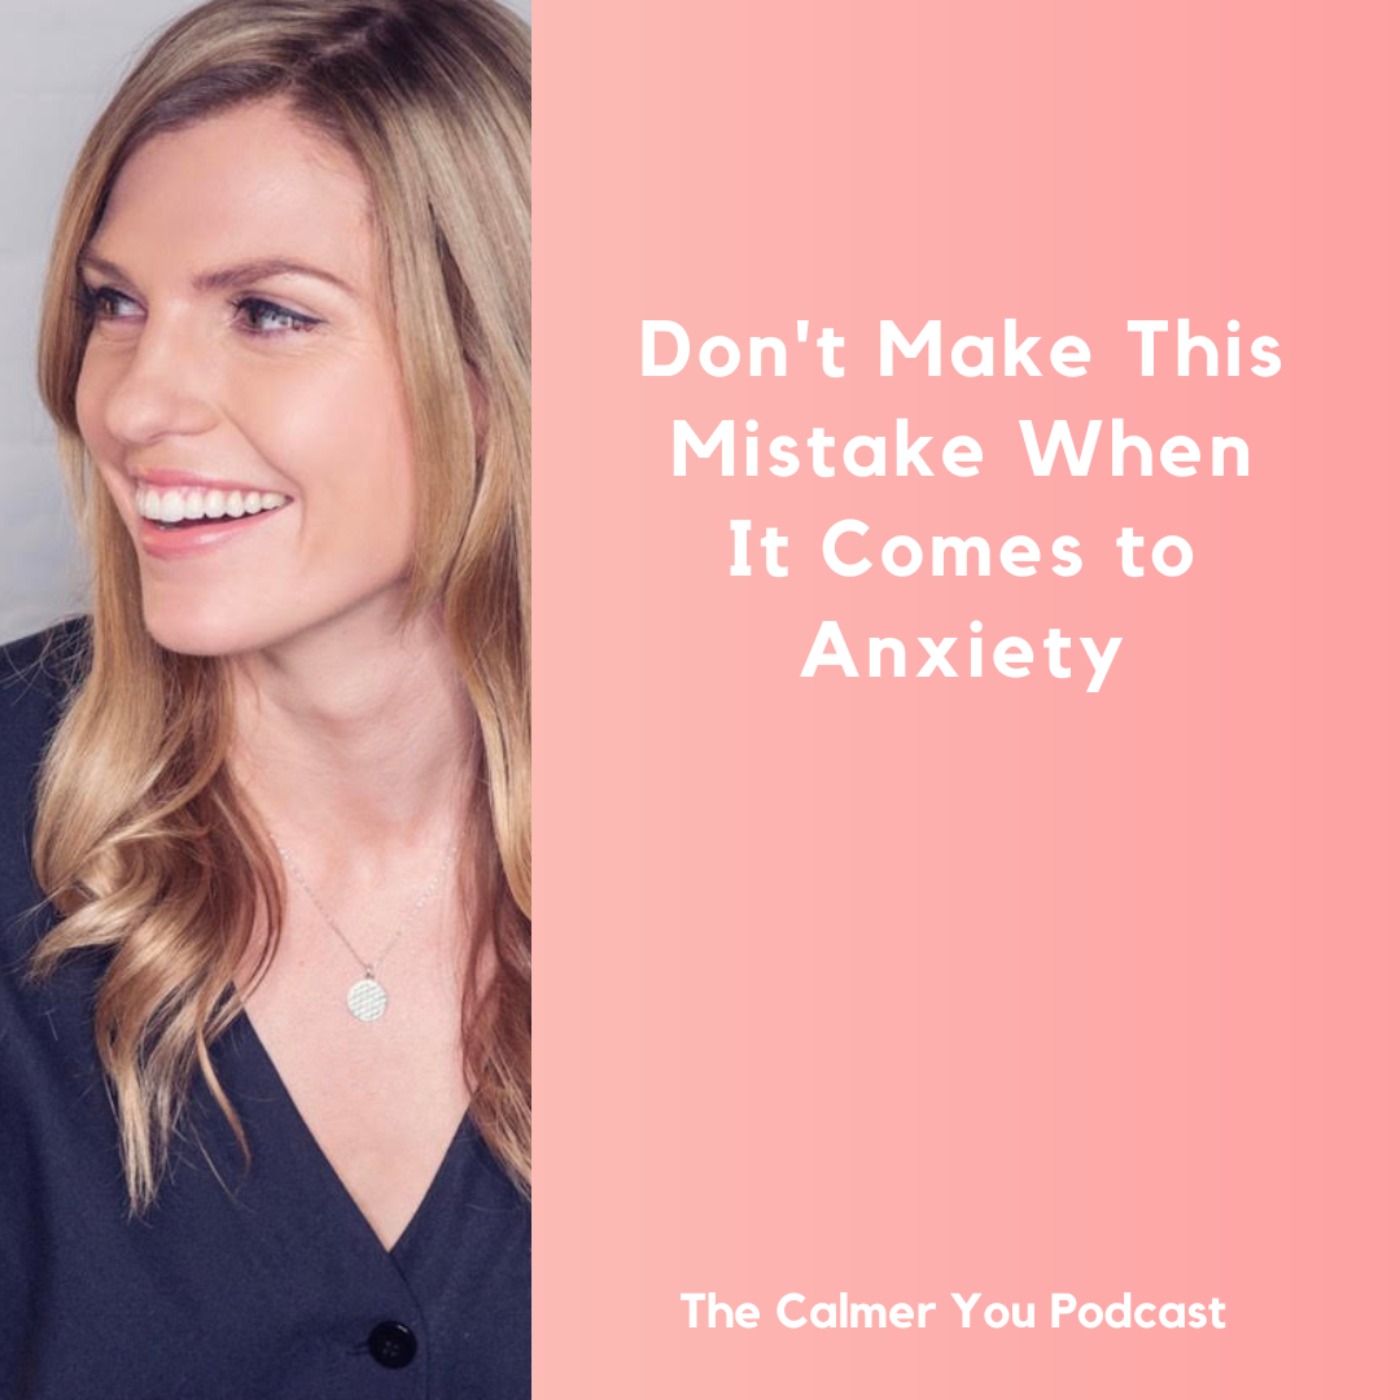 Ep 201. Don’t Make This Mistake When It Comes to Anxiety